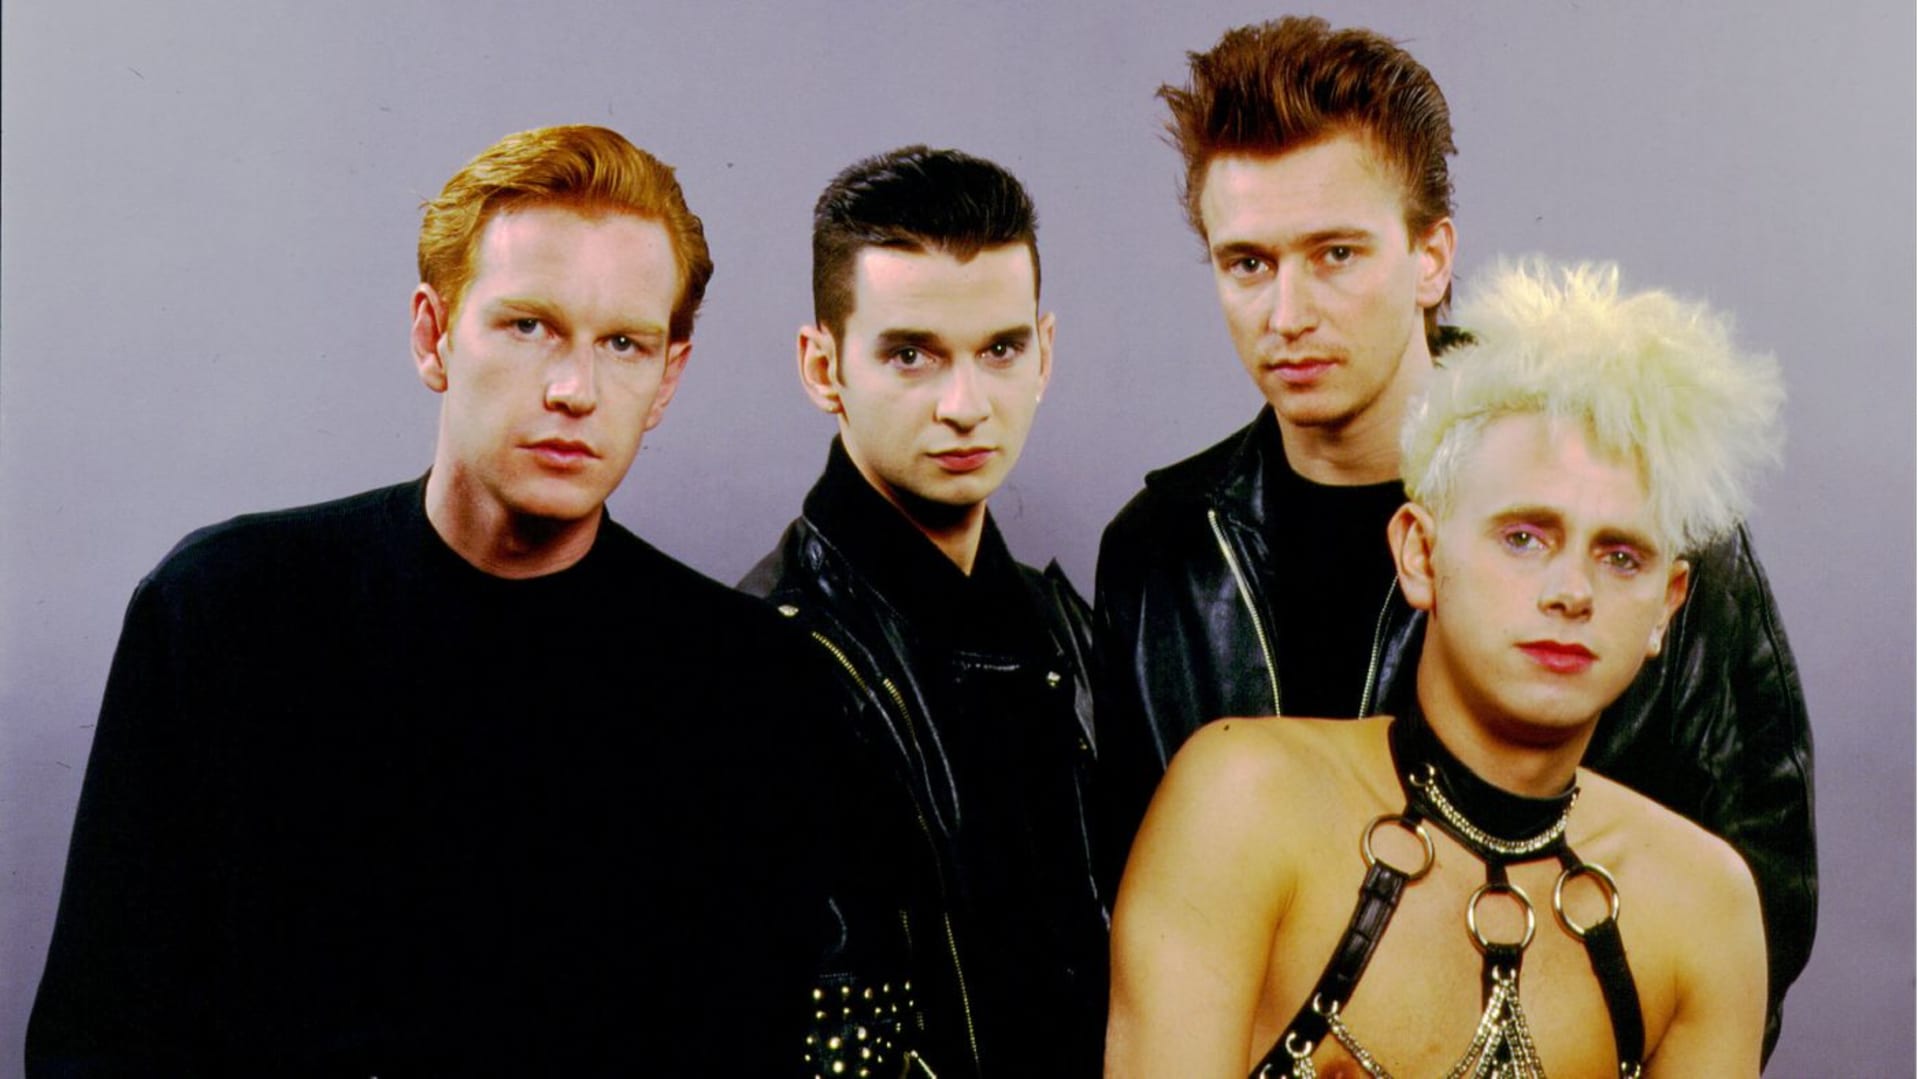 Tracing Depeche Mode's Fashion Through Their Best Videos